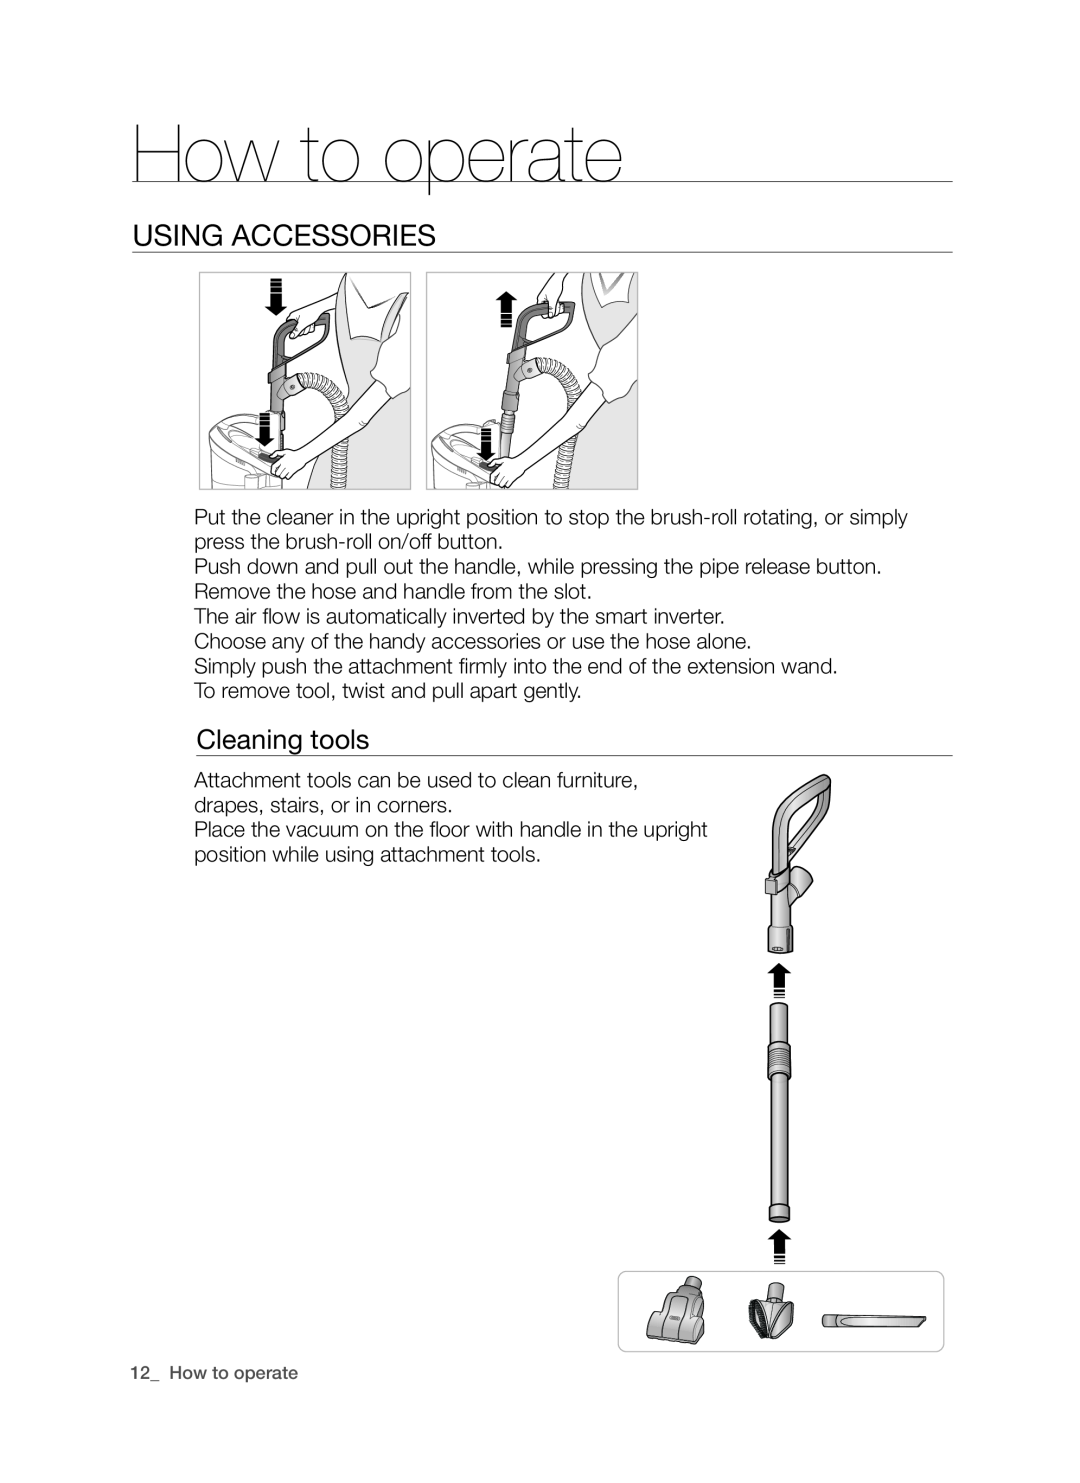 Samsung SU9380, DJ68-00264B user manual uSINg AccESSORIES, Cleaning tools, How to operate 